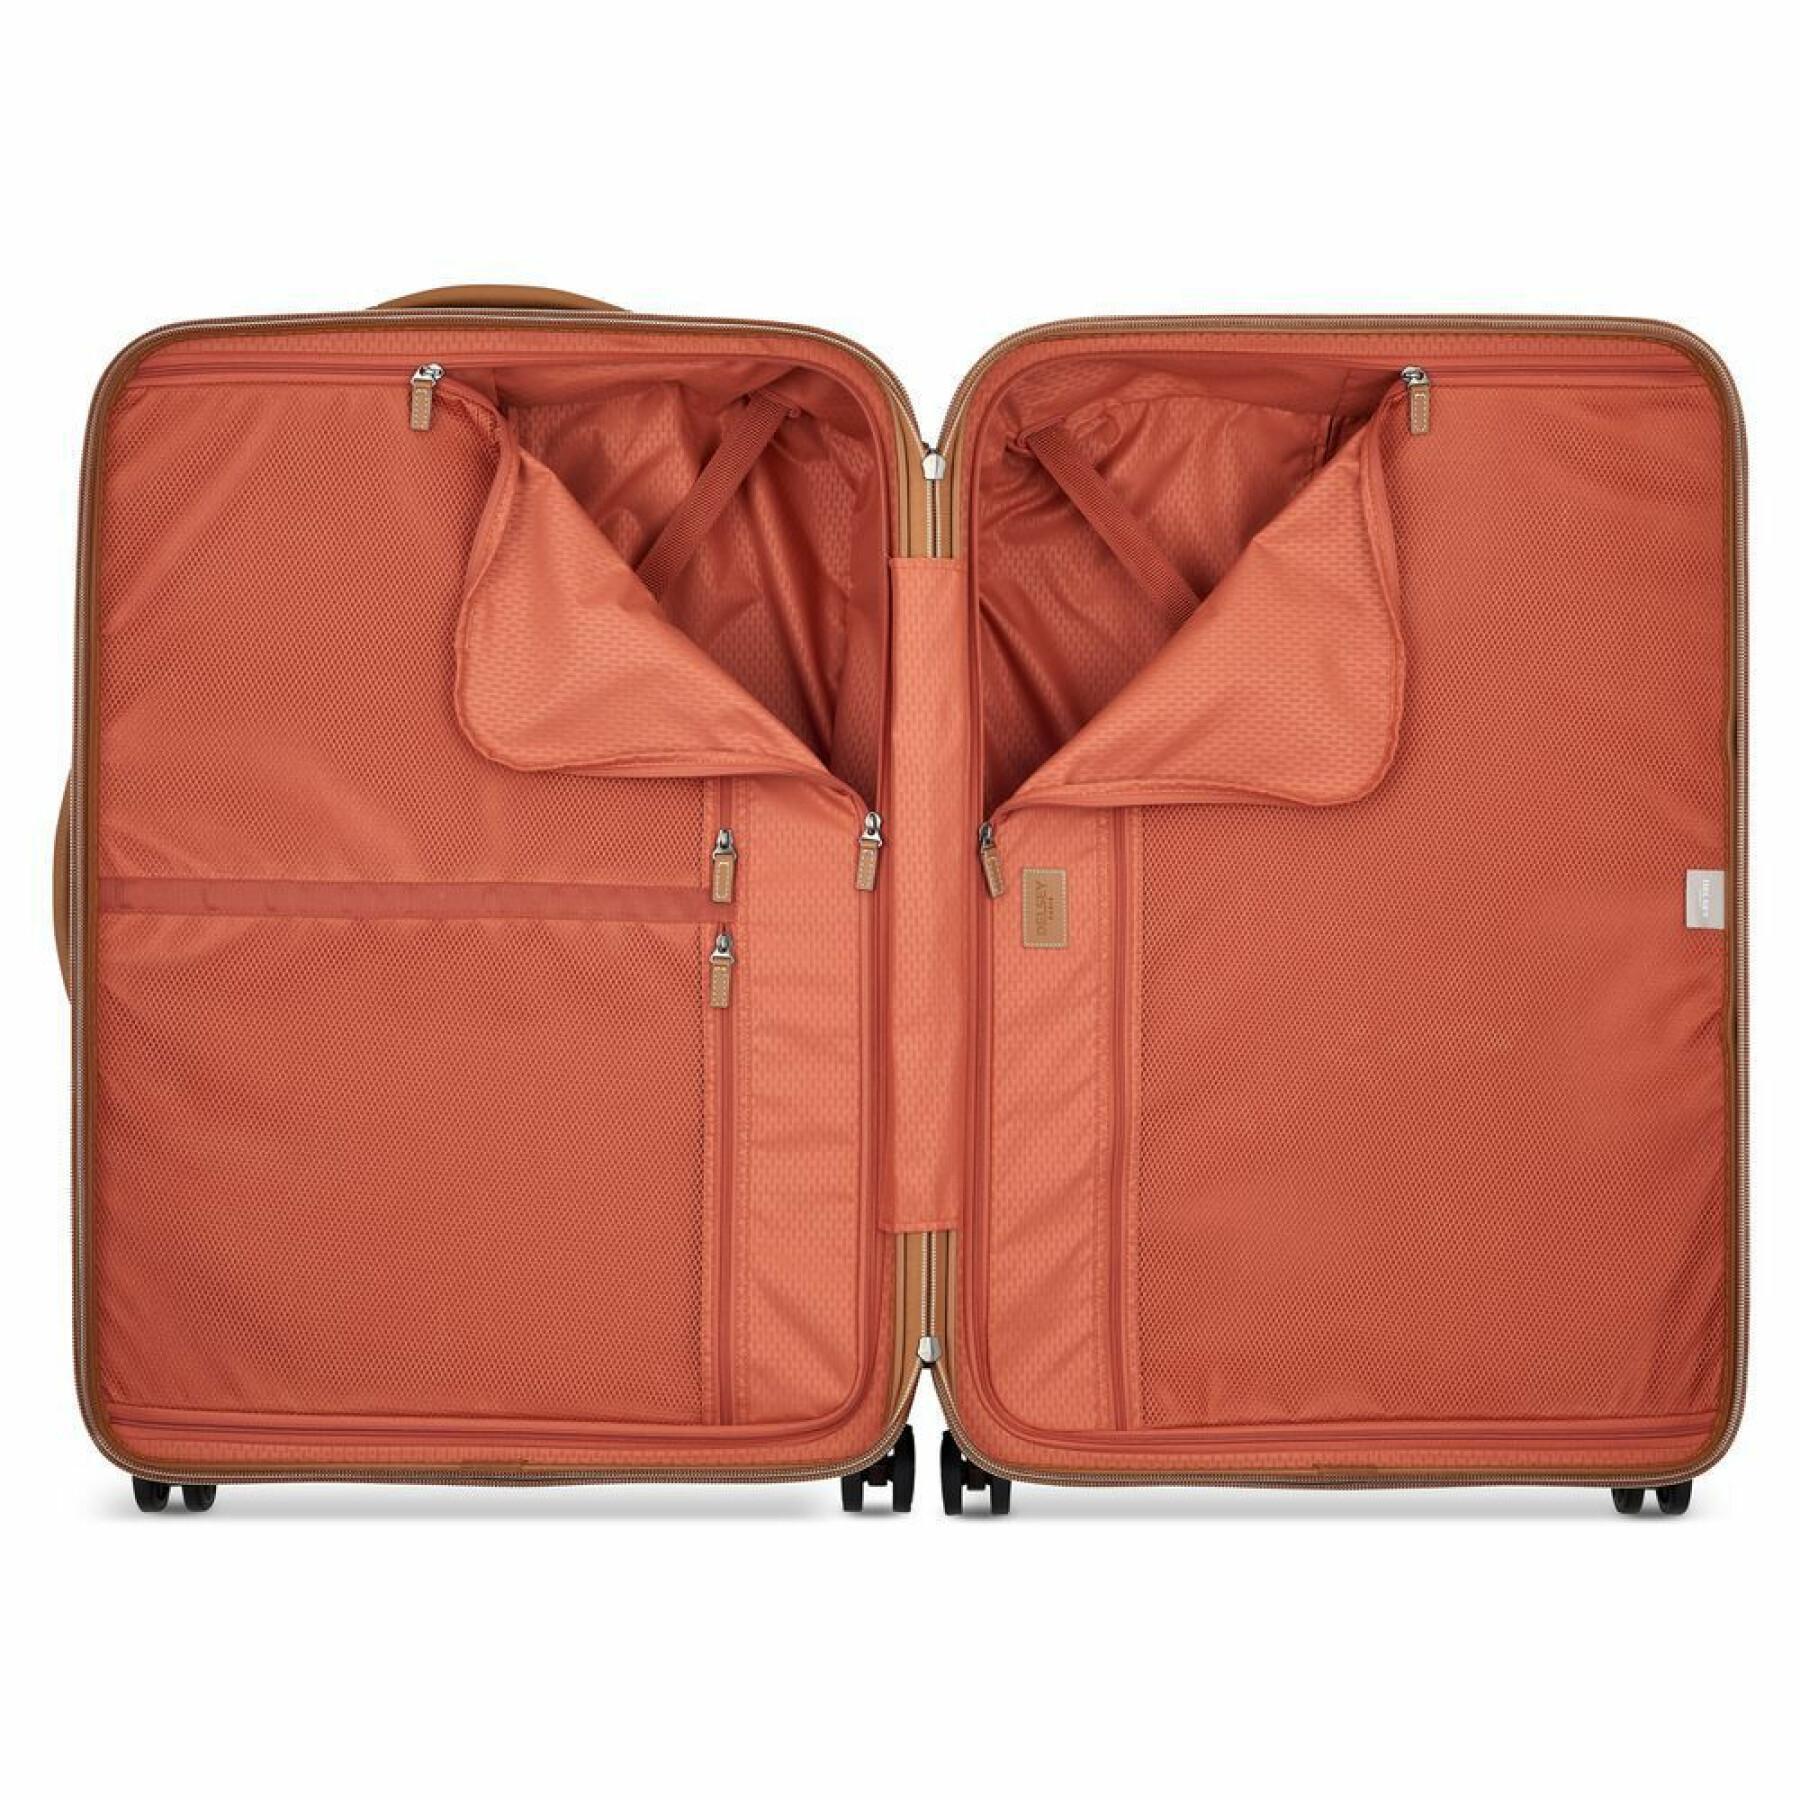 Trolley suitcase 4 double wheels Delsey Chatelet Air 2.0 77 cm